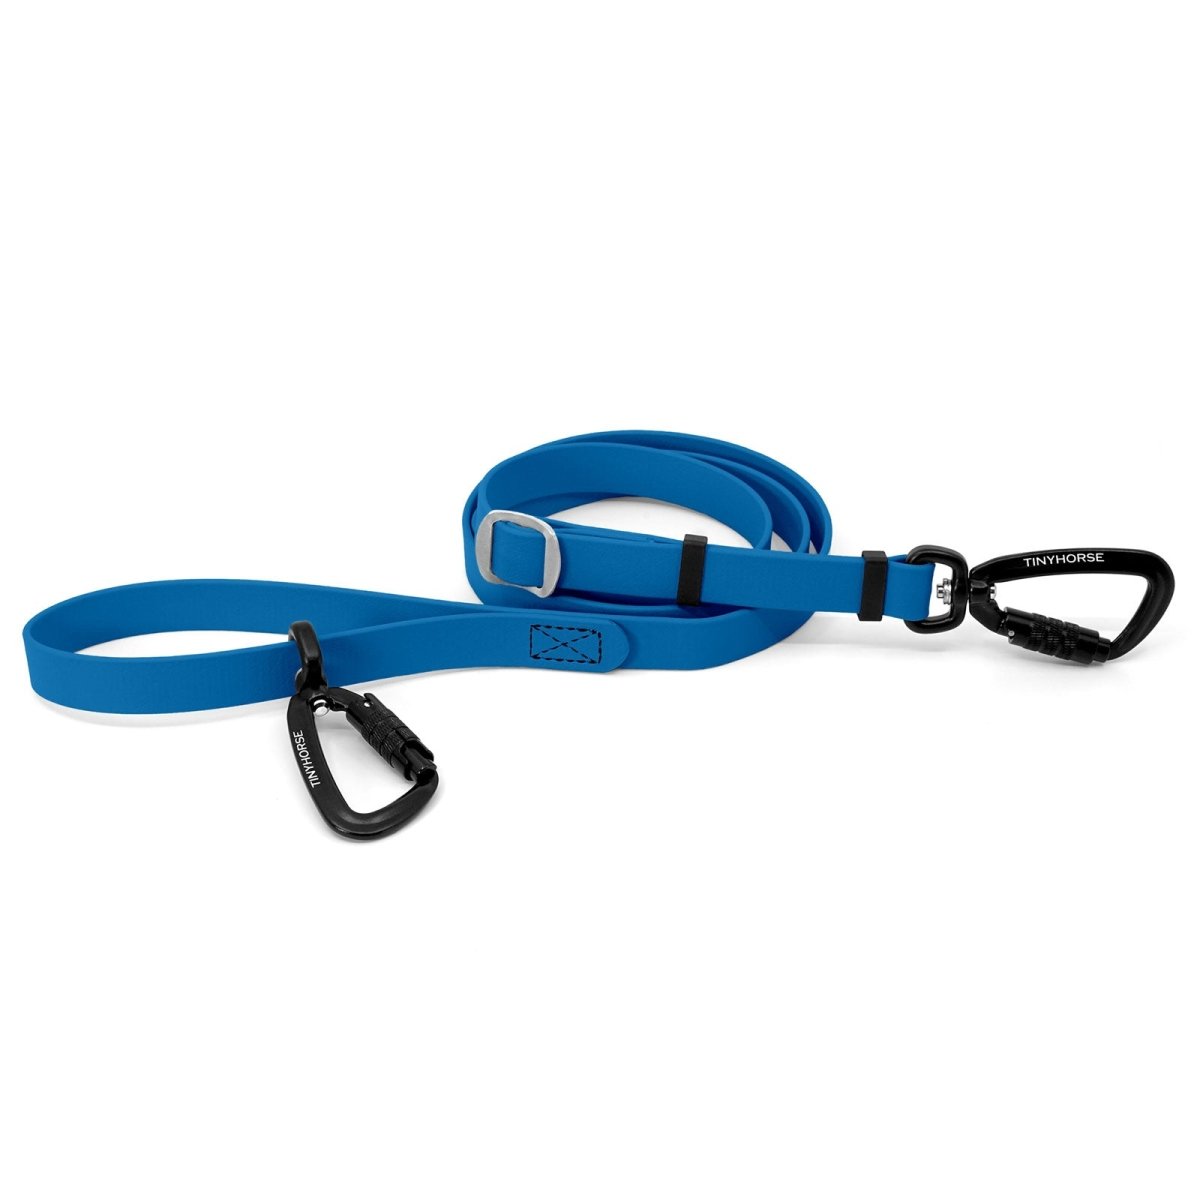 An adjustable bay blue-coloured Lead-All Pro Extra made of BioThane with 2 auto-locking carabiners